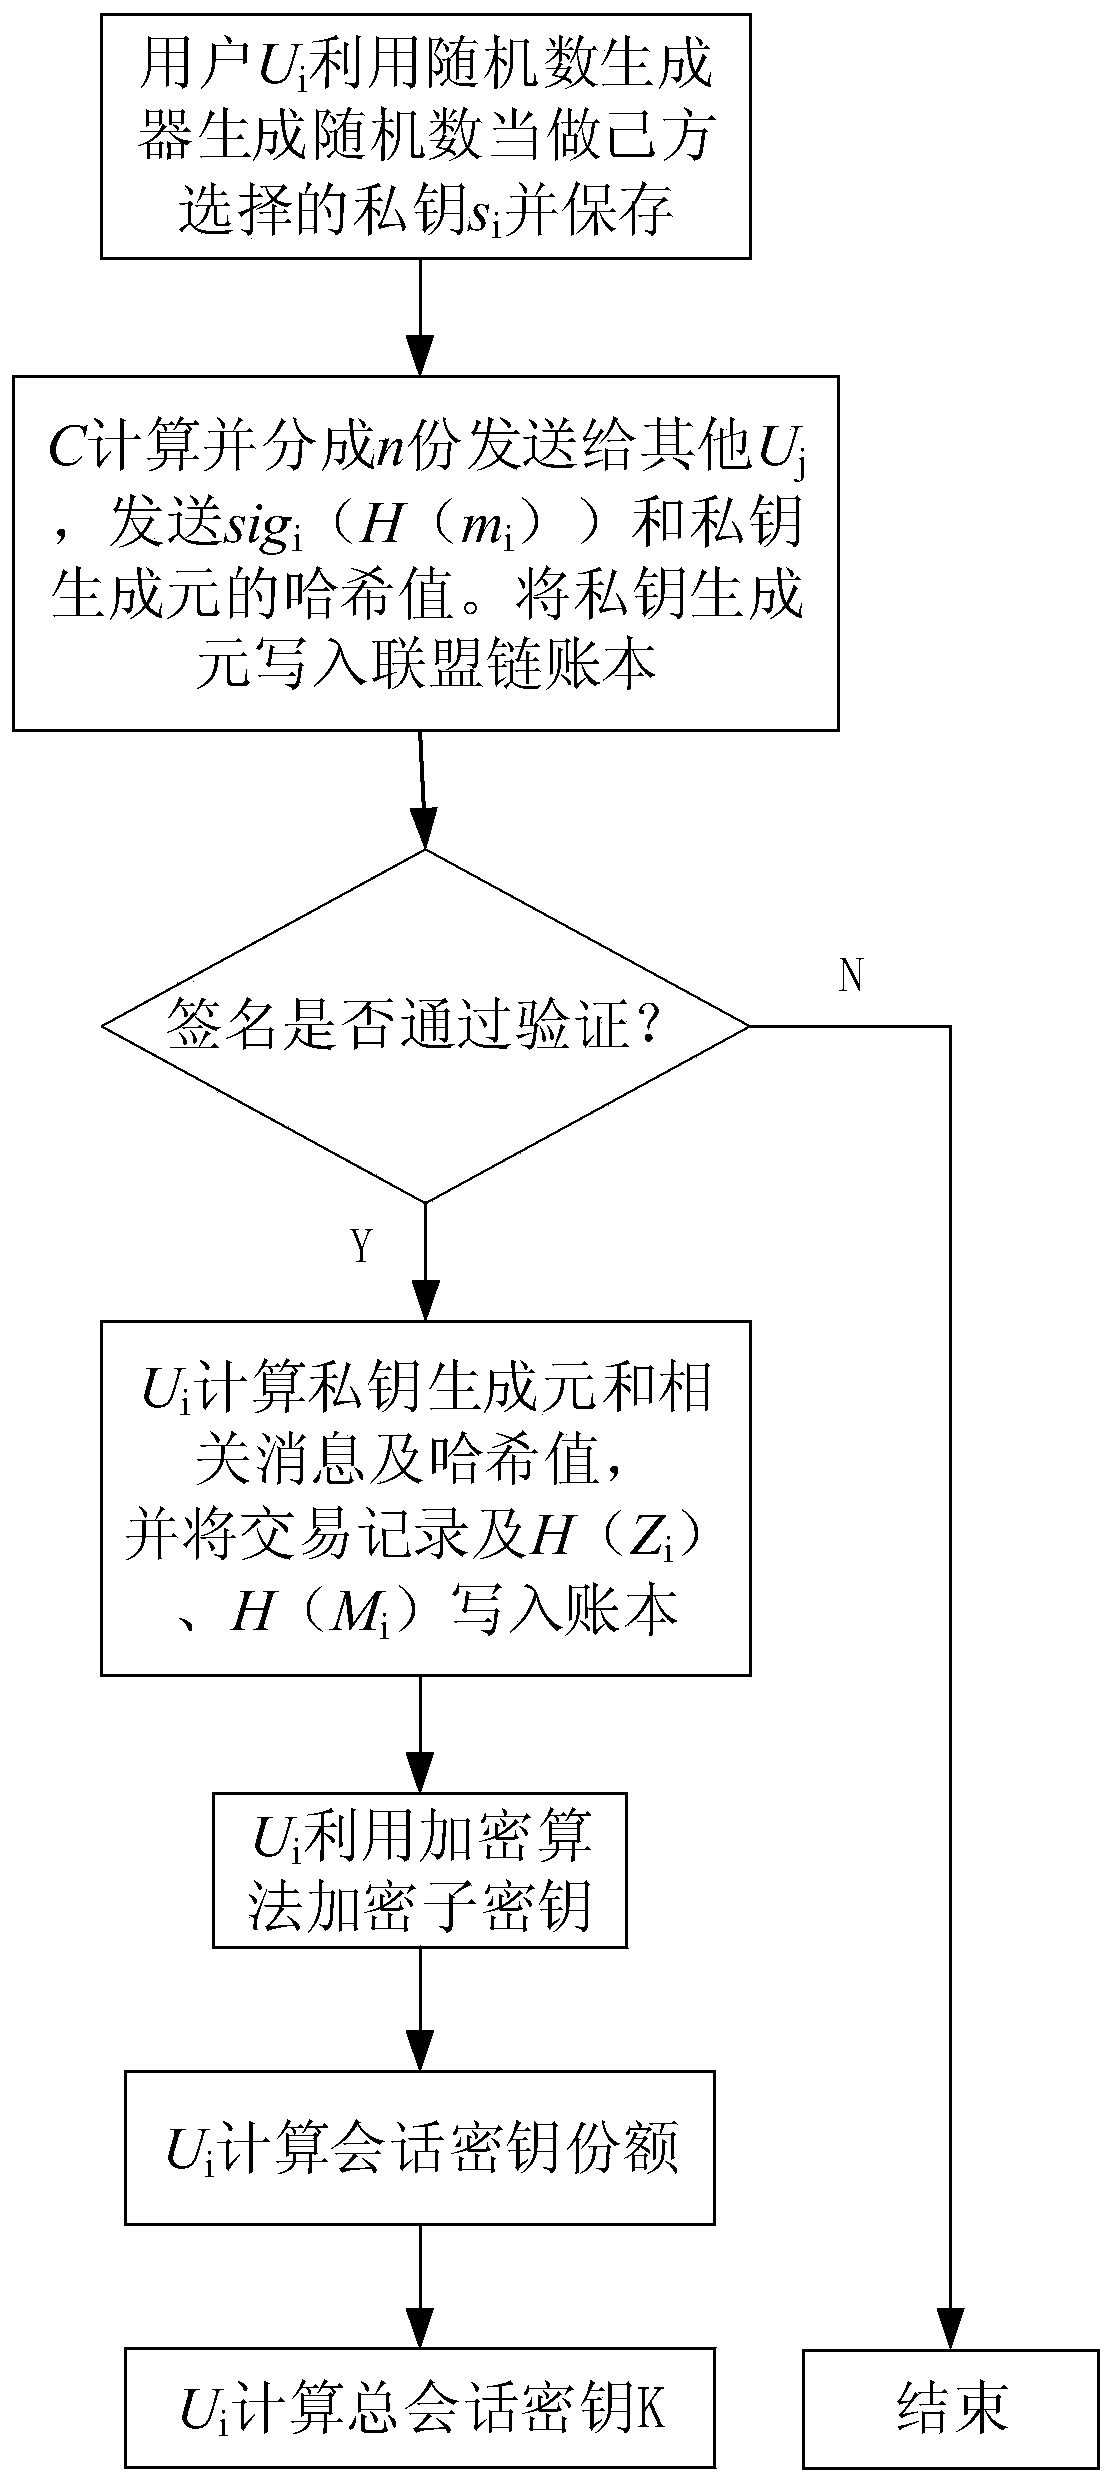 Alliance chain encryption method based on bilinear mapping technology